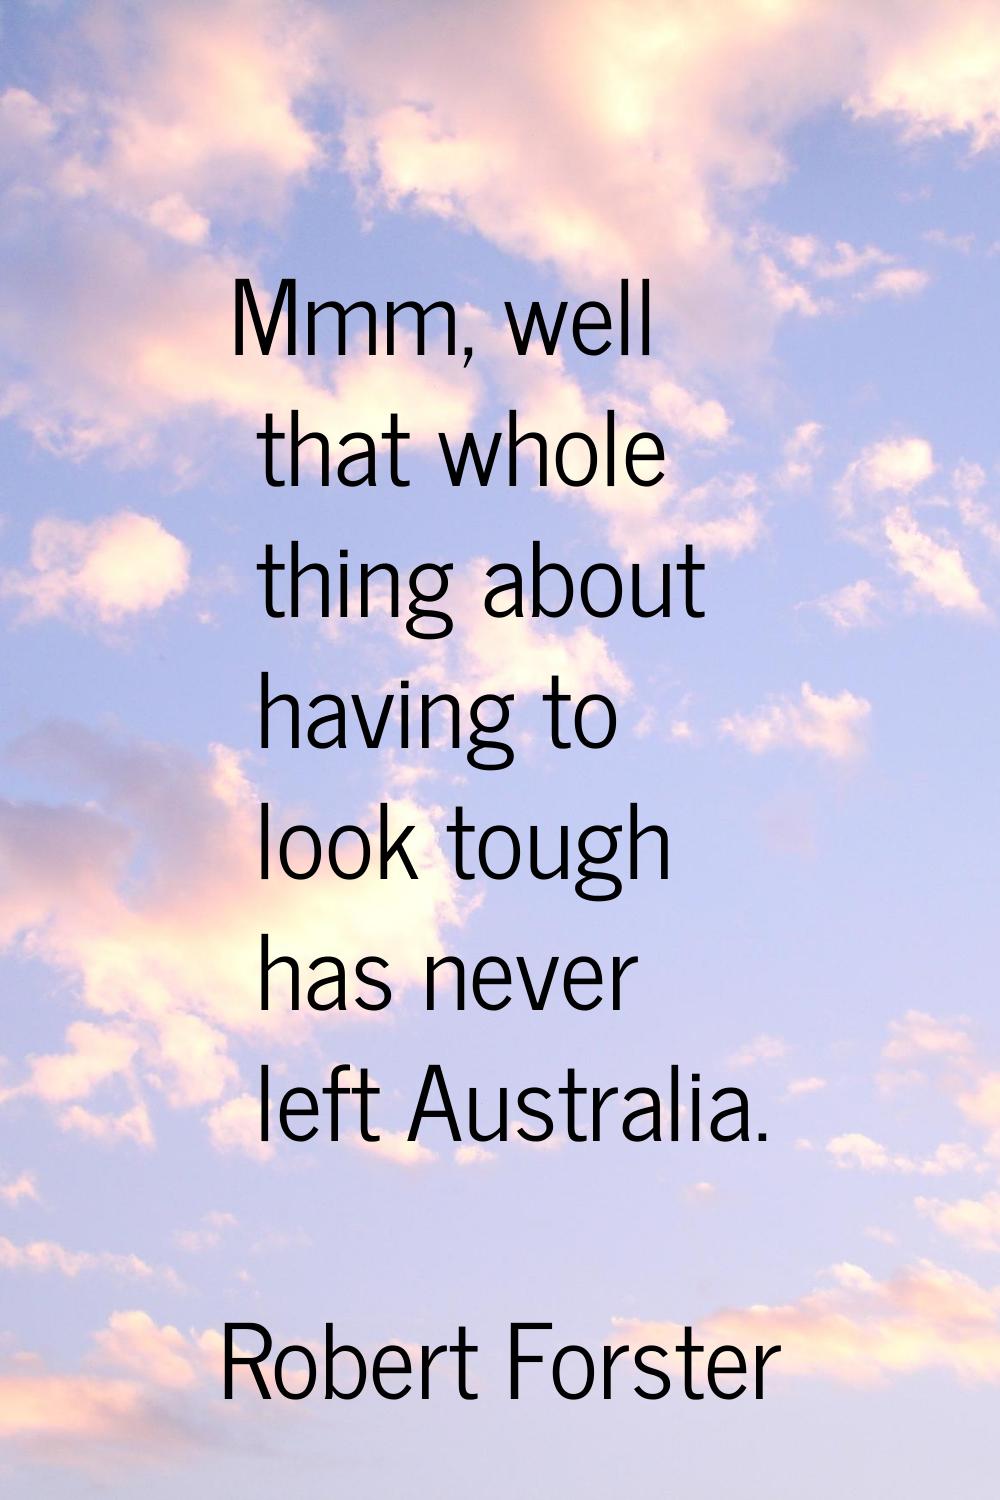 Mmm, well that whole thing about having to look tough has never left Australia.